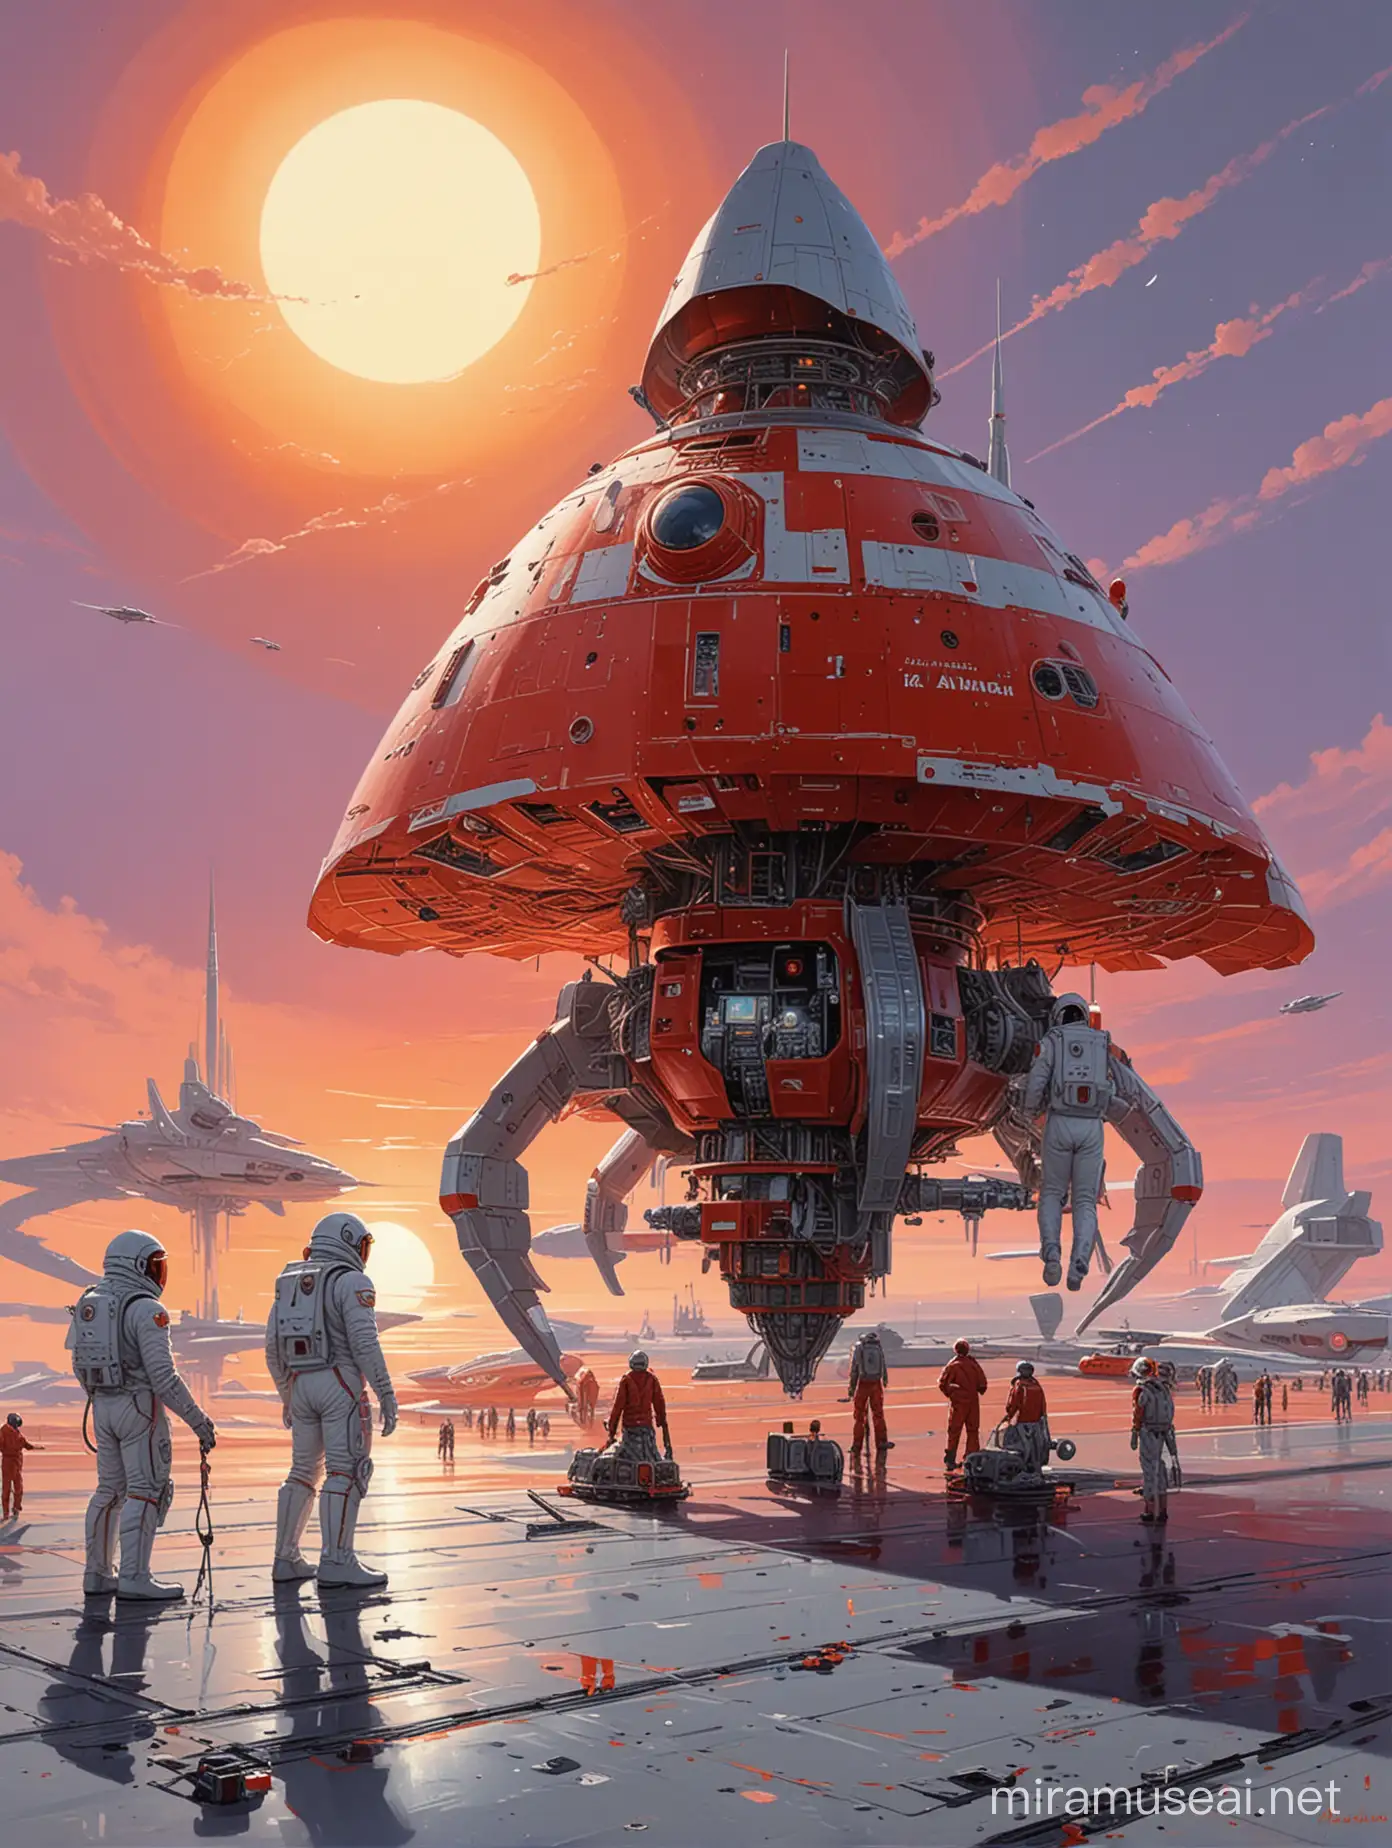 A breathtakingly intricate (((painting))) in the style of "Interstellar Queen from Spacecraft 2000-2100AD" by Angus McKie, a spaceport with spacesuited workers performing maintenance on a grey runway, futuristic spacecraft are parked in the background, a red sun in the sky, use muted pastel colors only, high quality